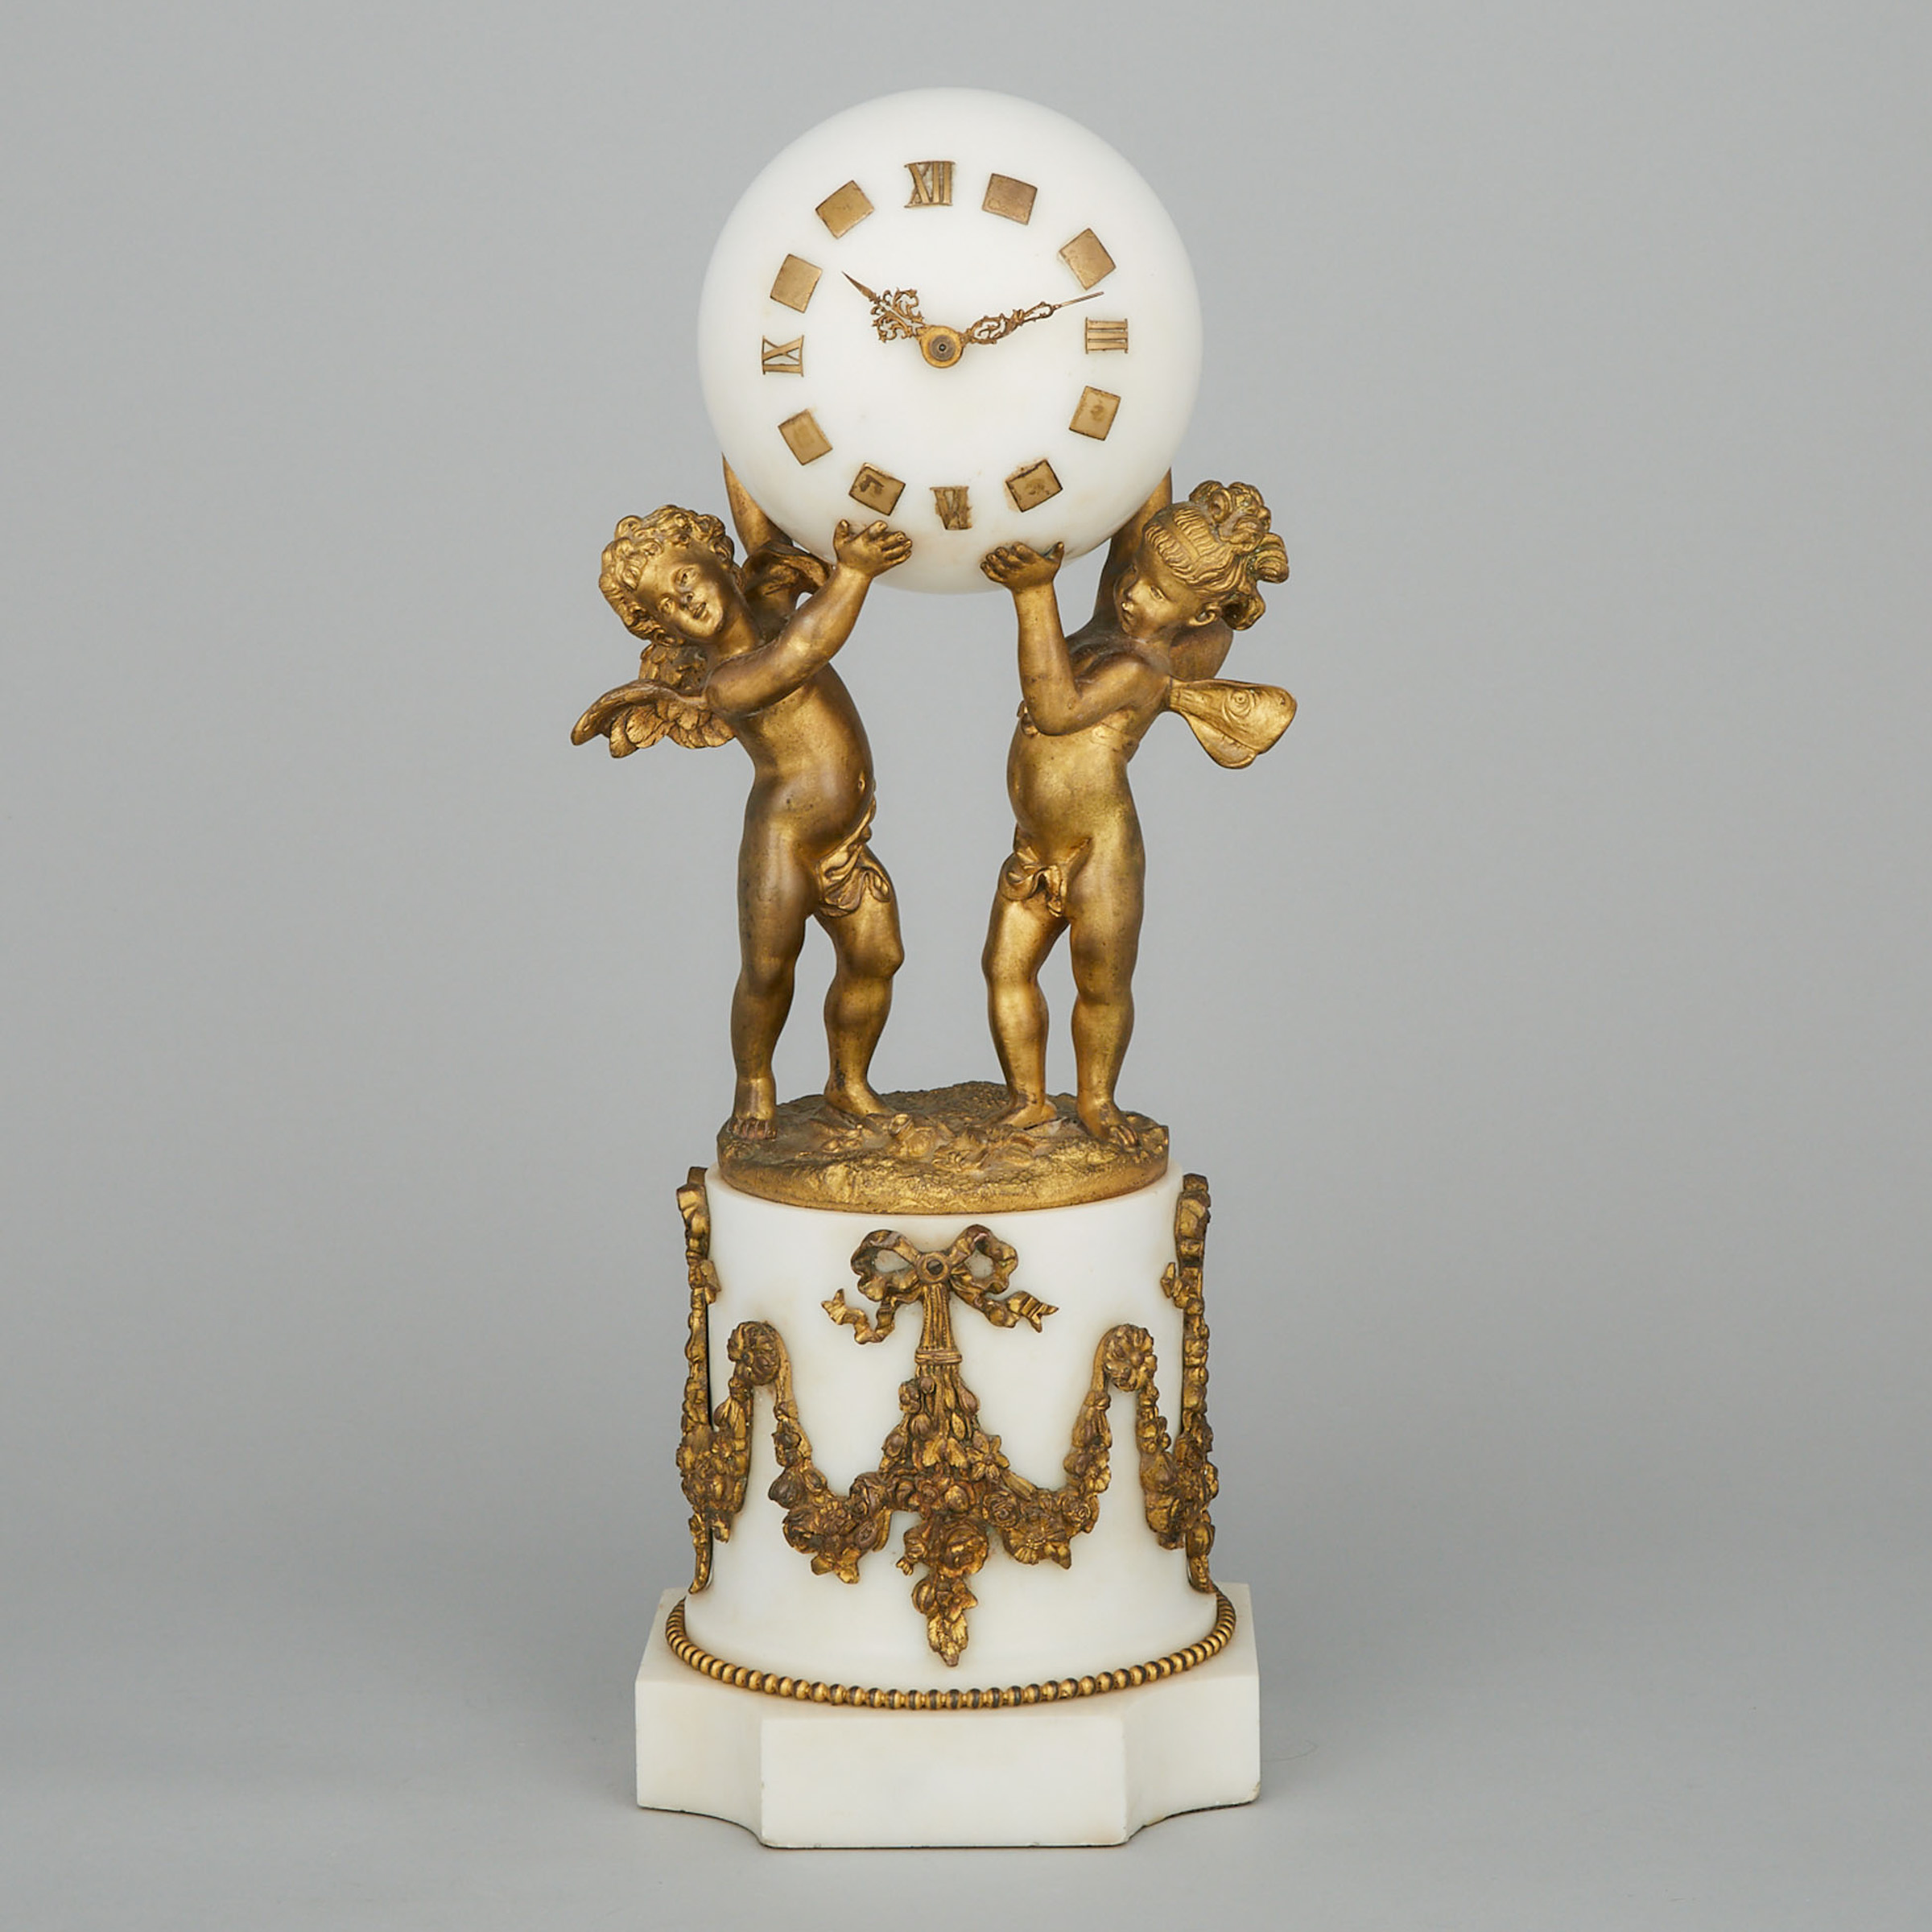 Napoleon III Gilt Bronze and Marble Sphere Mantle Clock, early 20th century